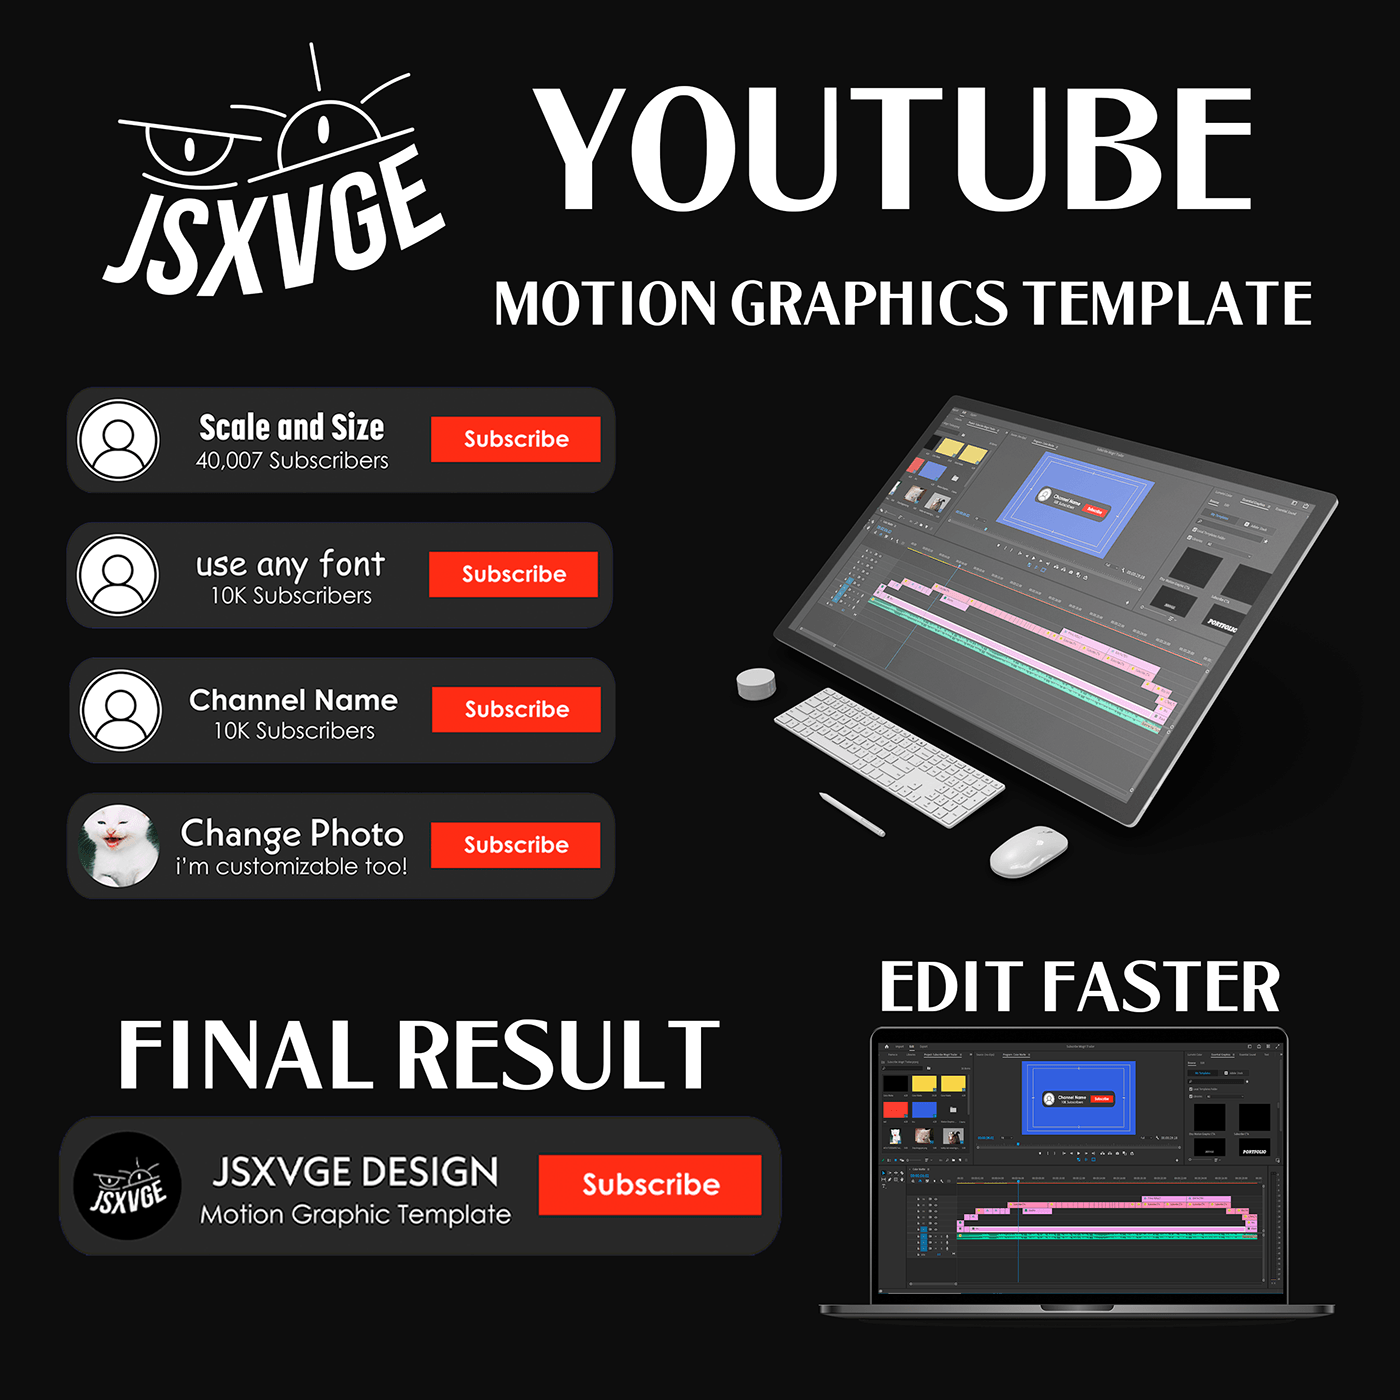 MOGRT Premiere Pro Video Editing after effects motion graphics  youtube Editing  Editor videography Motion Graphics Template